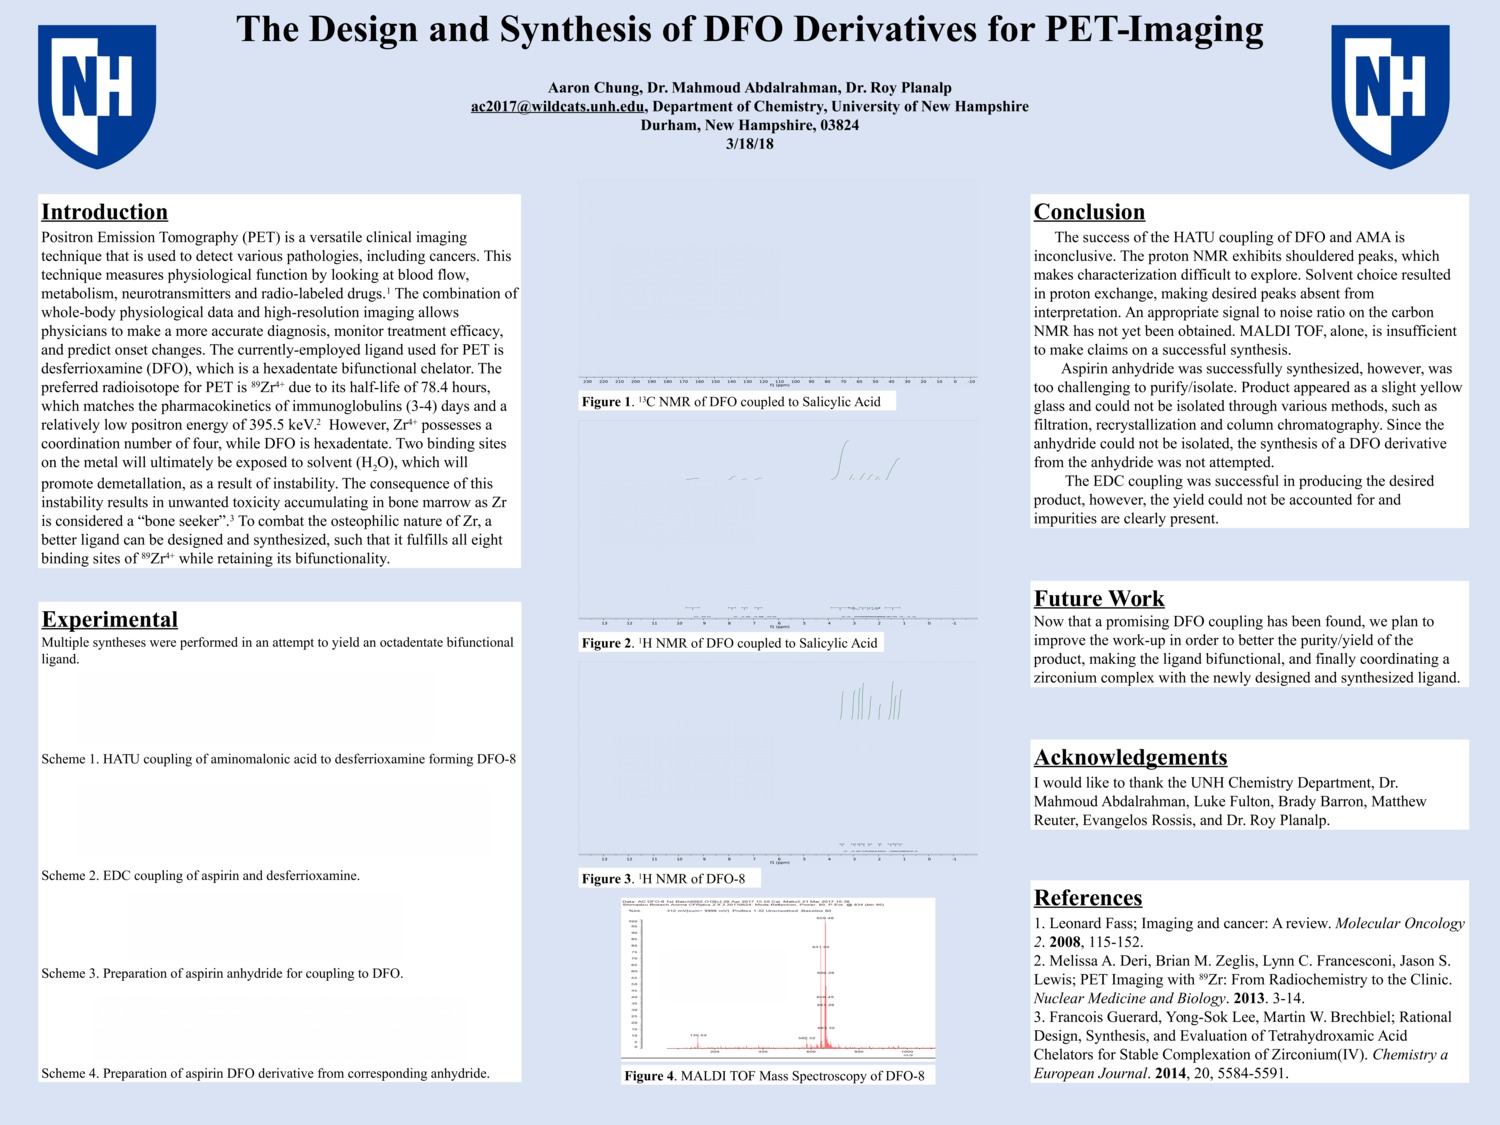 The Design And Synthesis Of Dfo Derivatives For Pet-Imaging by ac2017